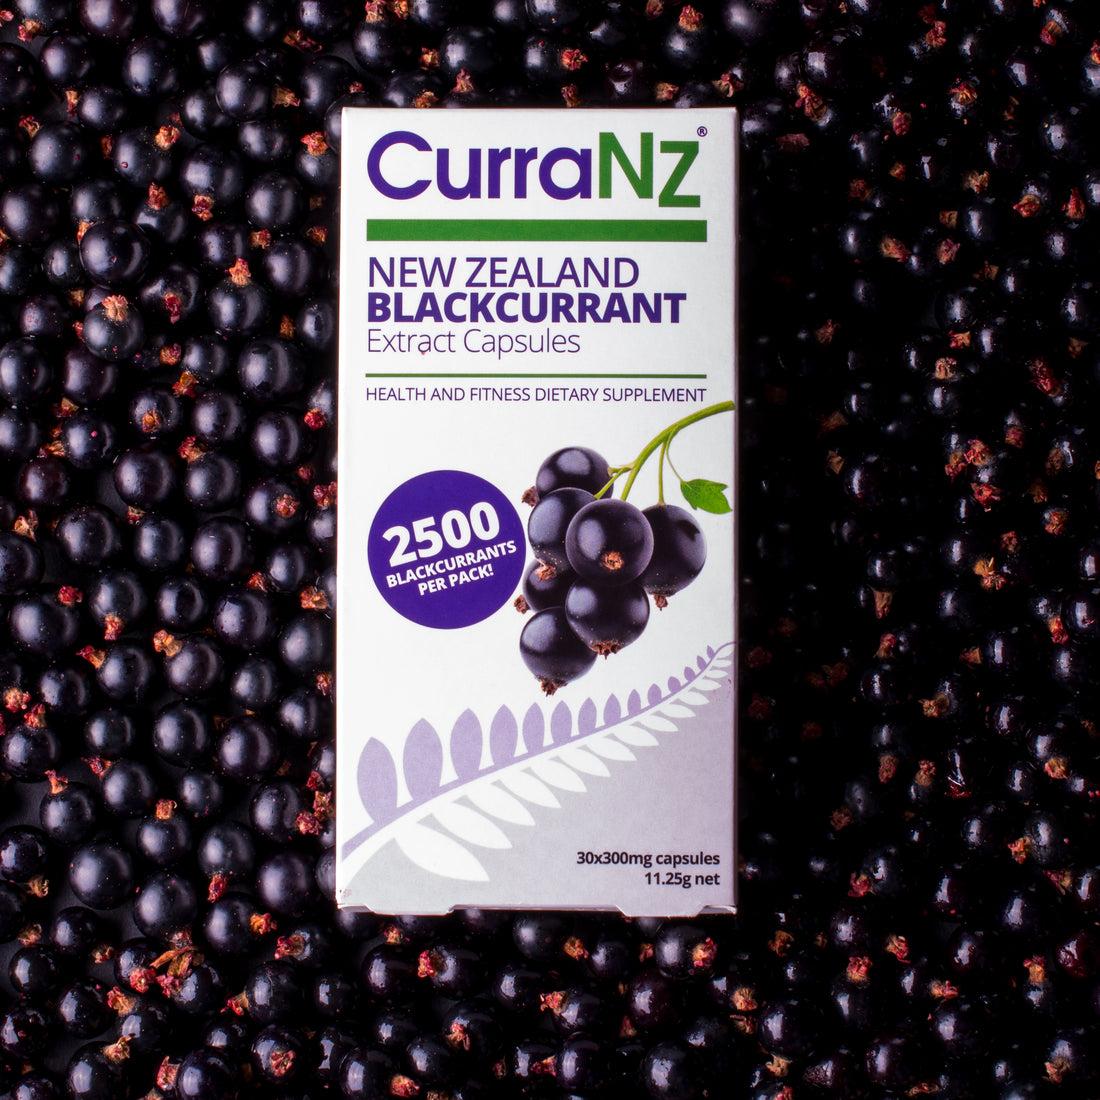 It's official! NZ blackcurrants are now the world's most researched berry, with CurraNZ leading the charge